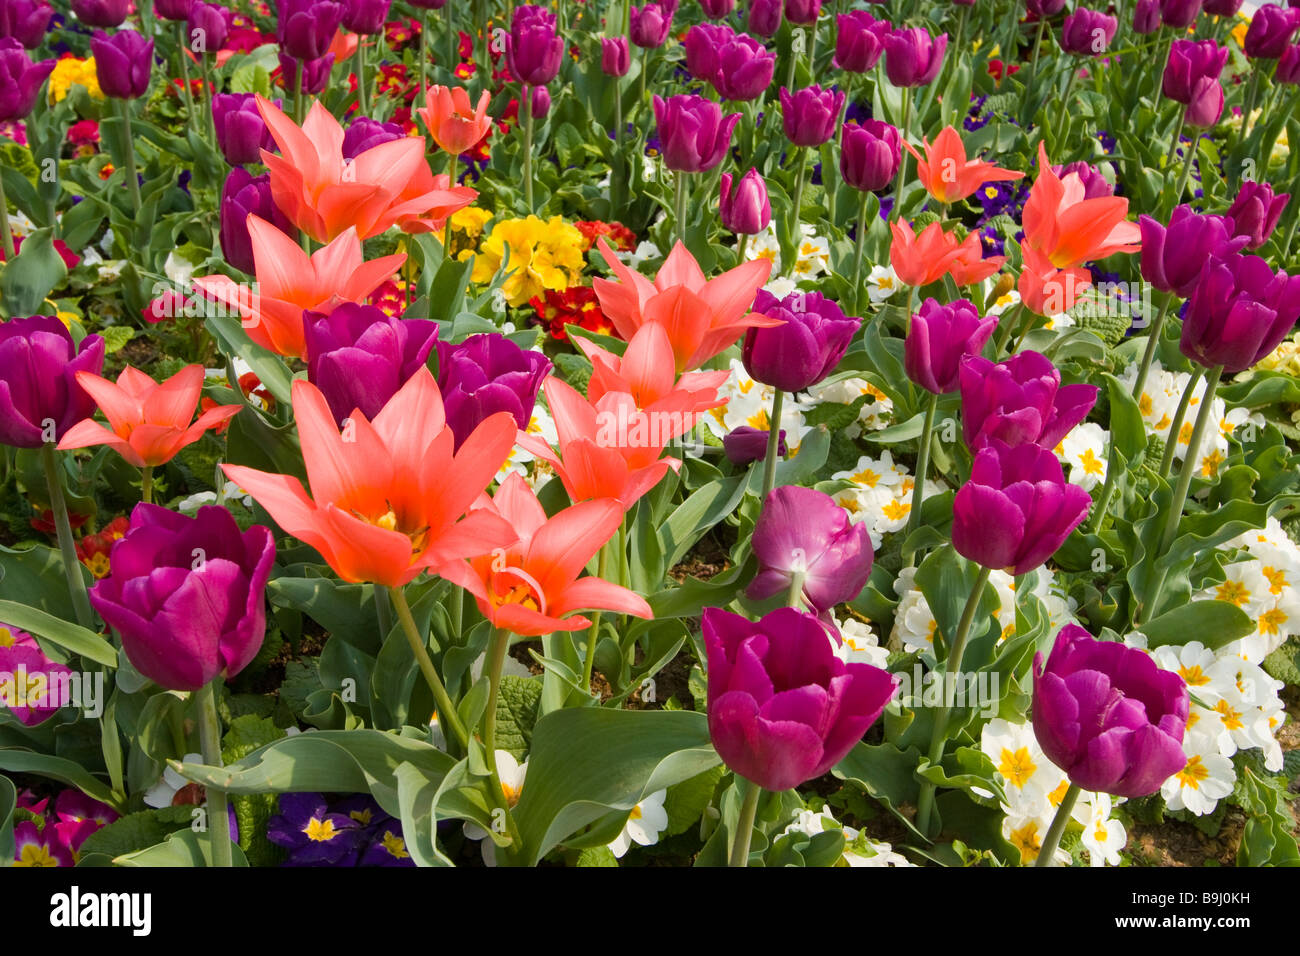 Tulips and pansies Stock Photo